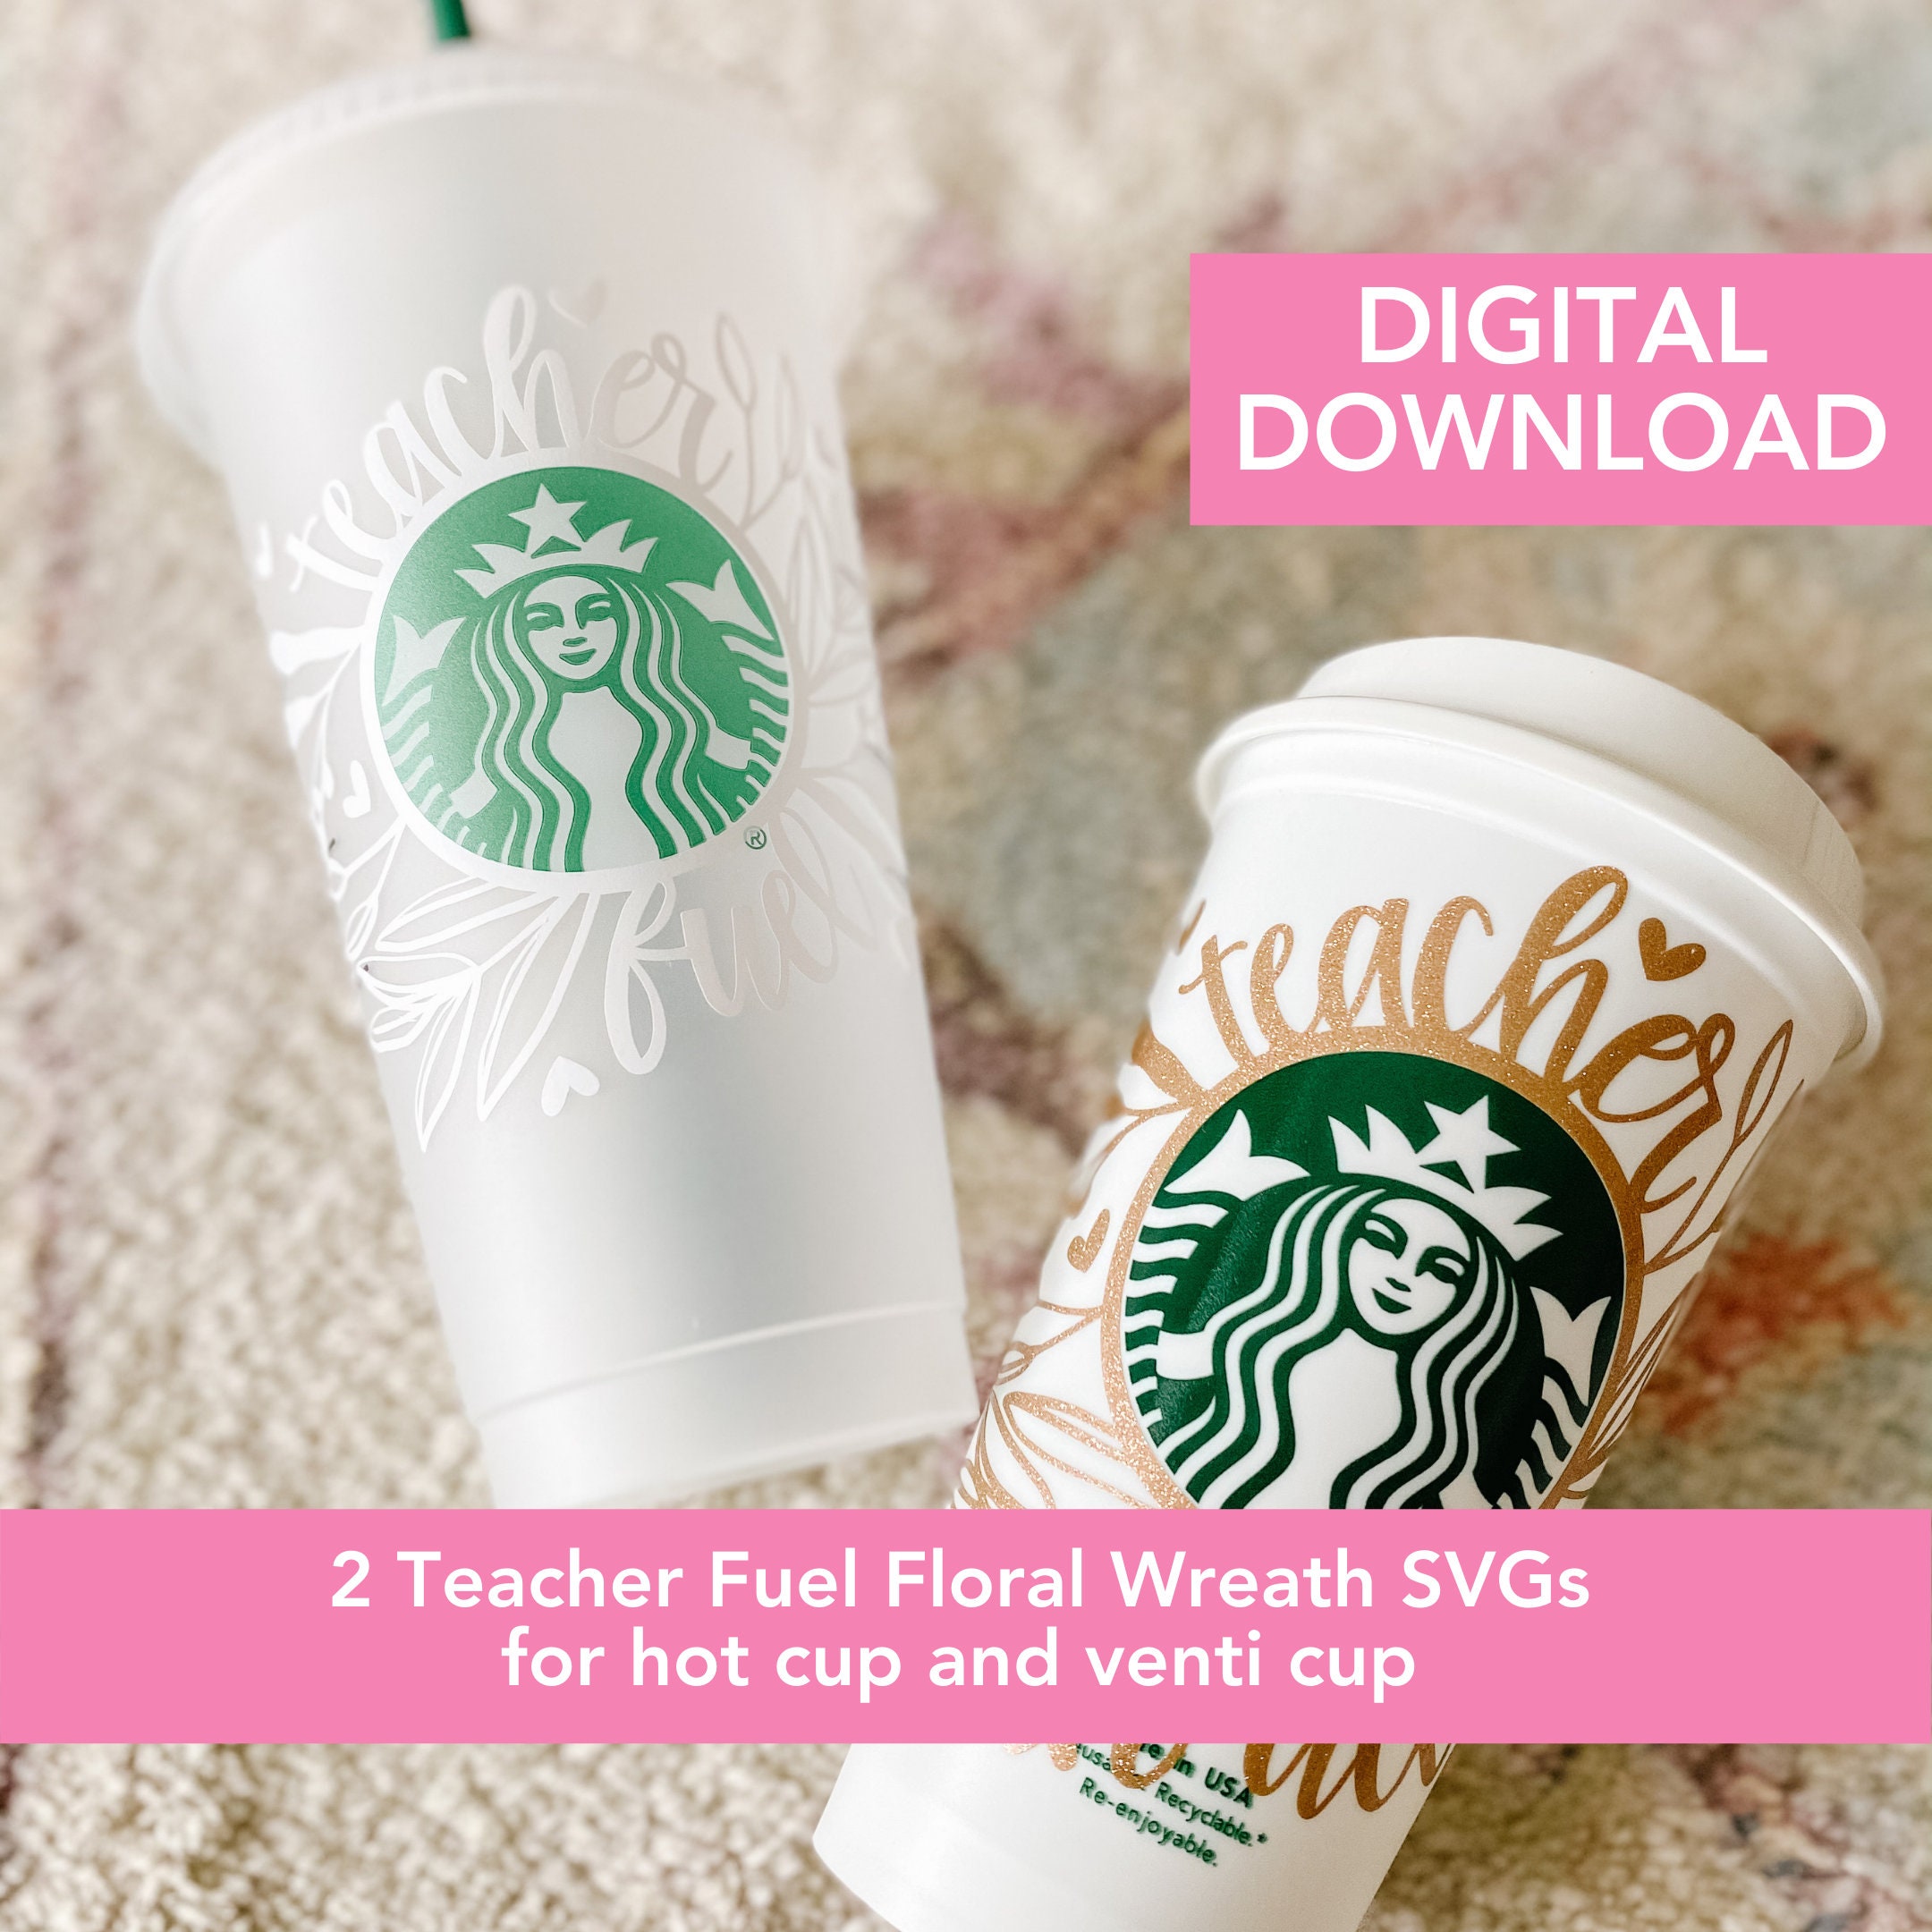 Starbucks 16oz Hot Cup Template – Decals And Daydreams